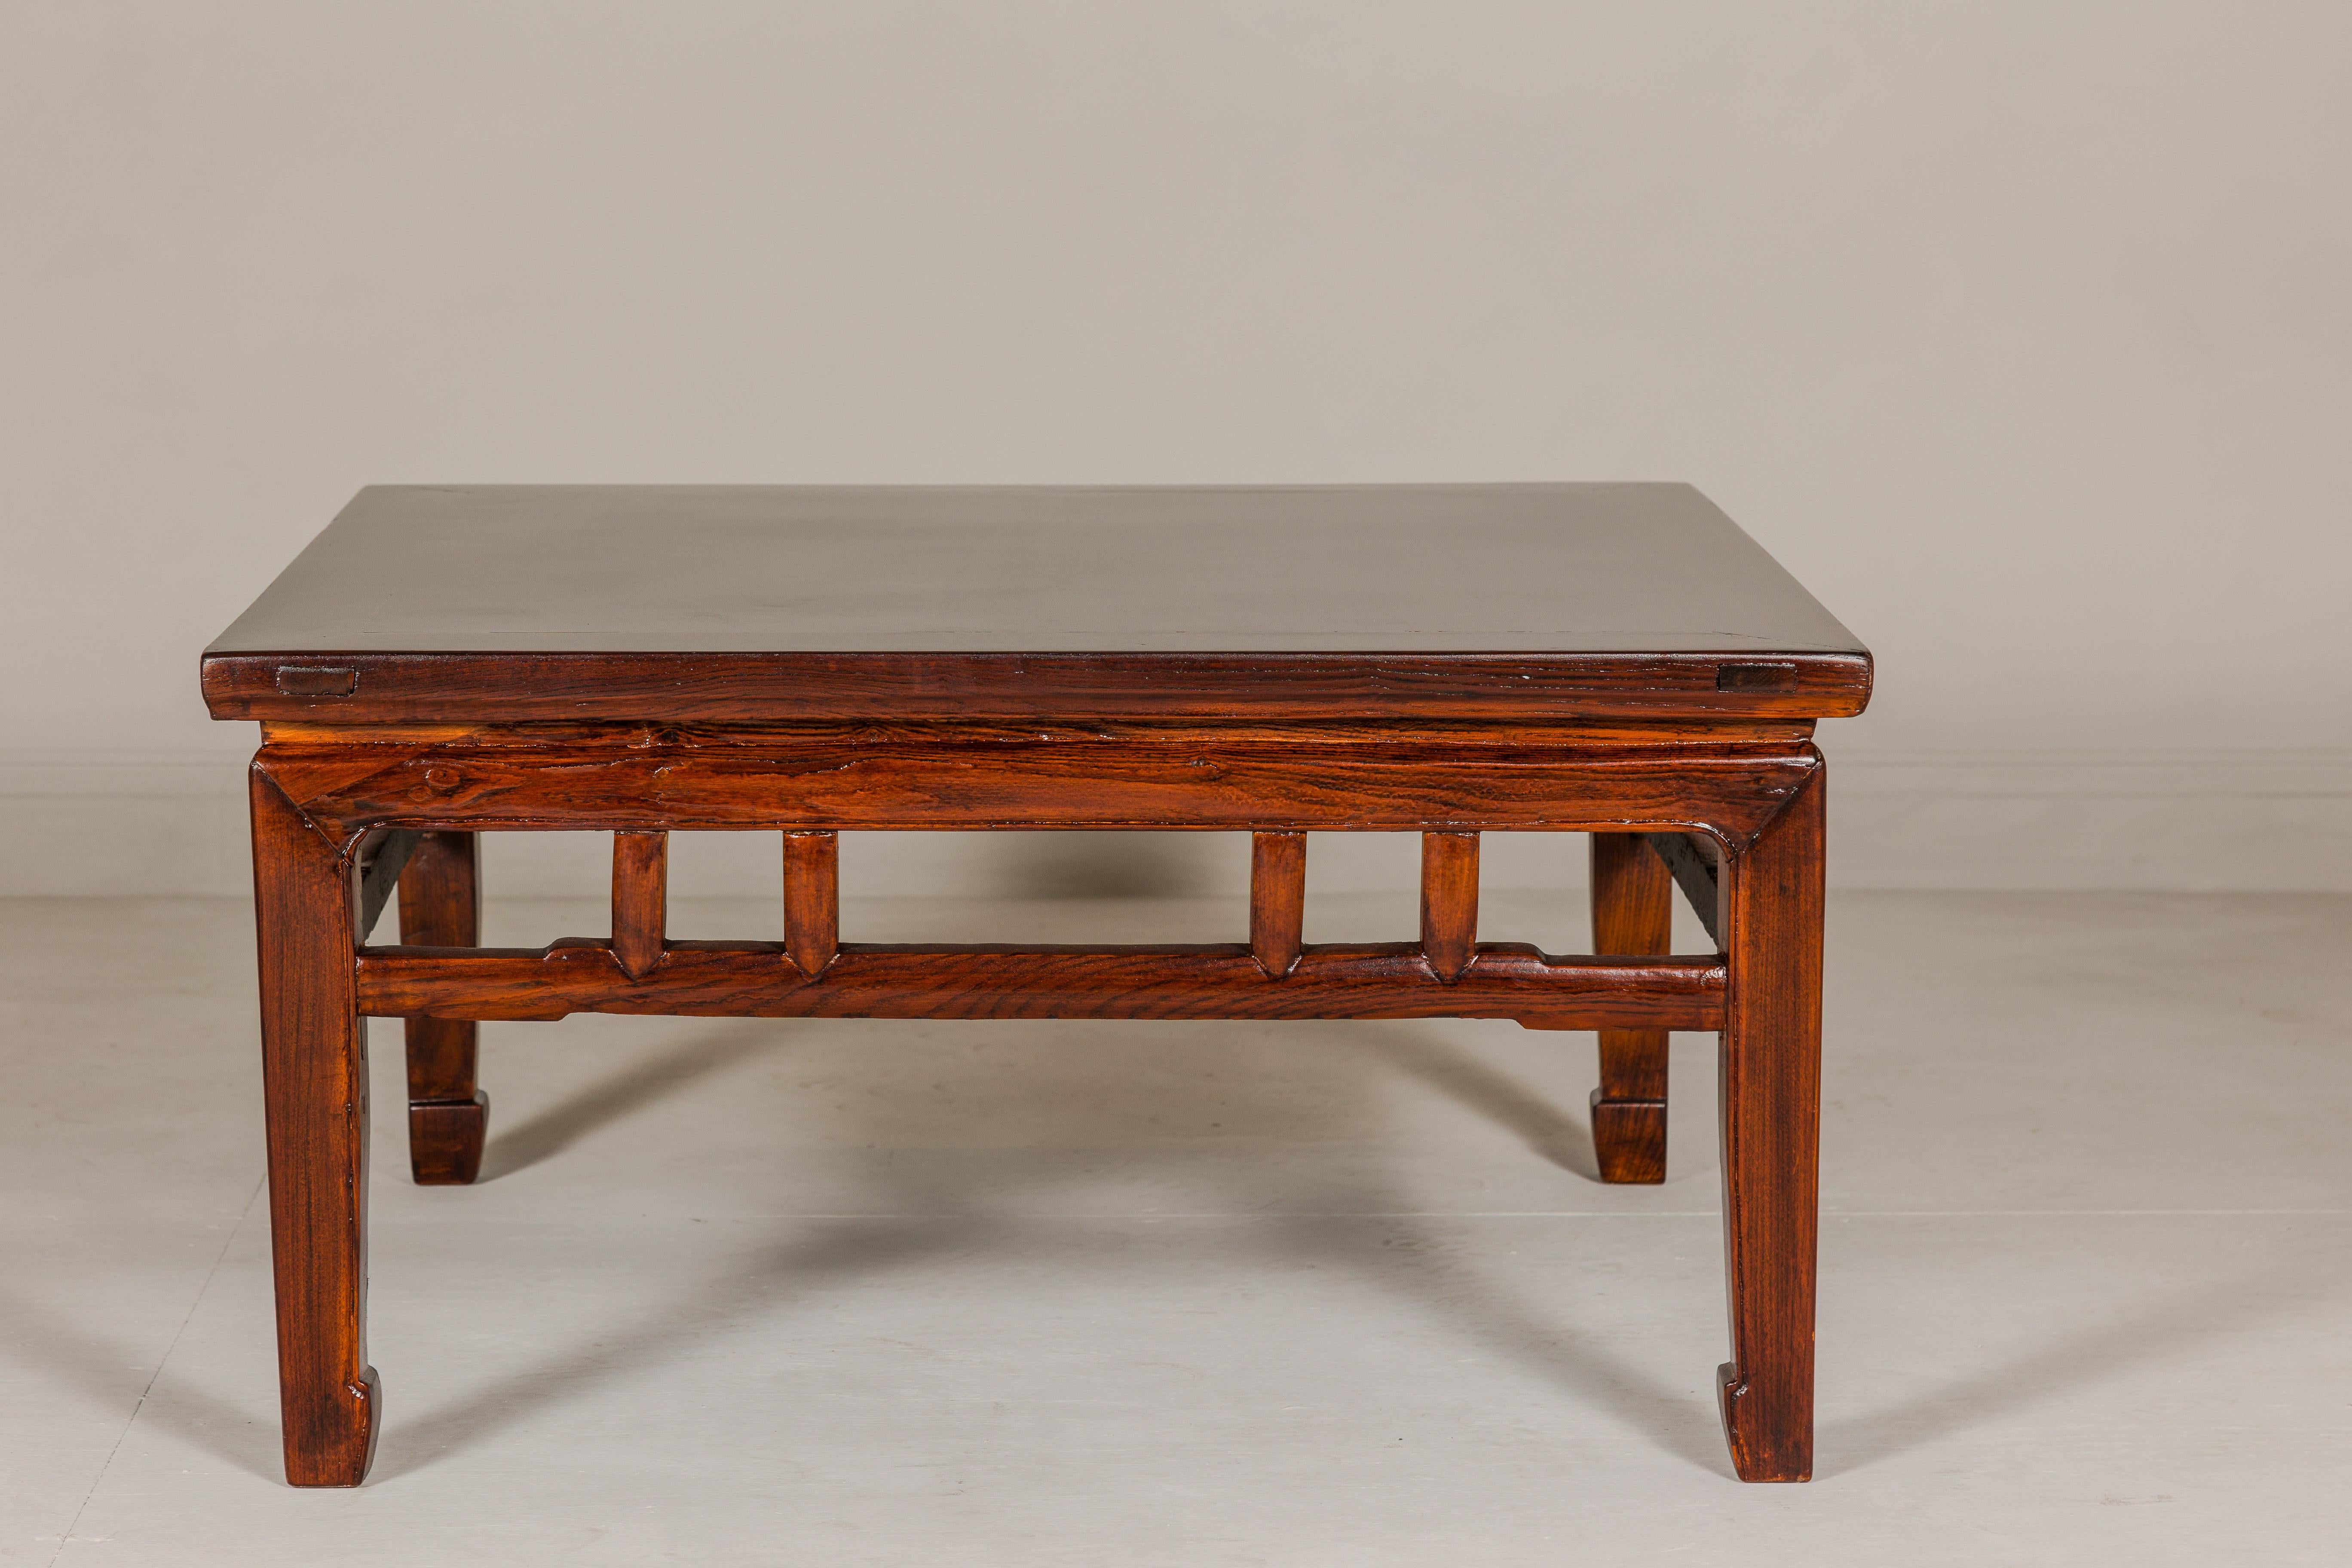 20th Century Low Square Coffee Table with Brown Lacquer, Horse Hoof Legs, Humpback Stretcher  For Sale